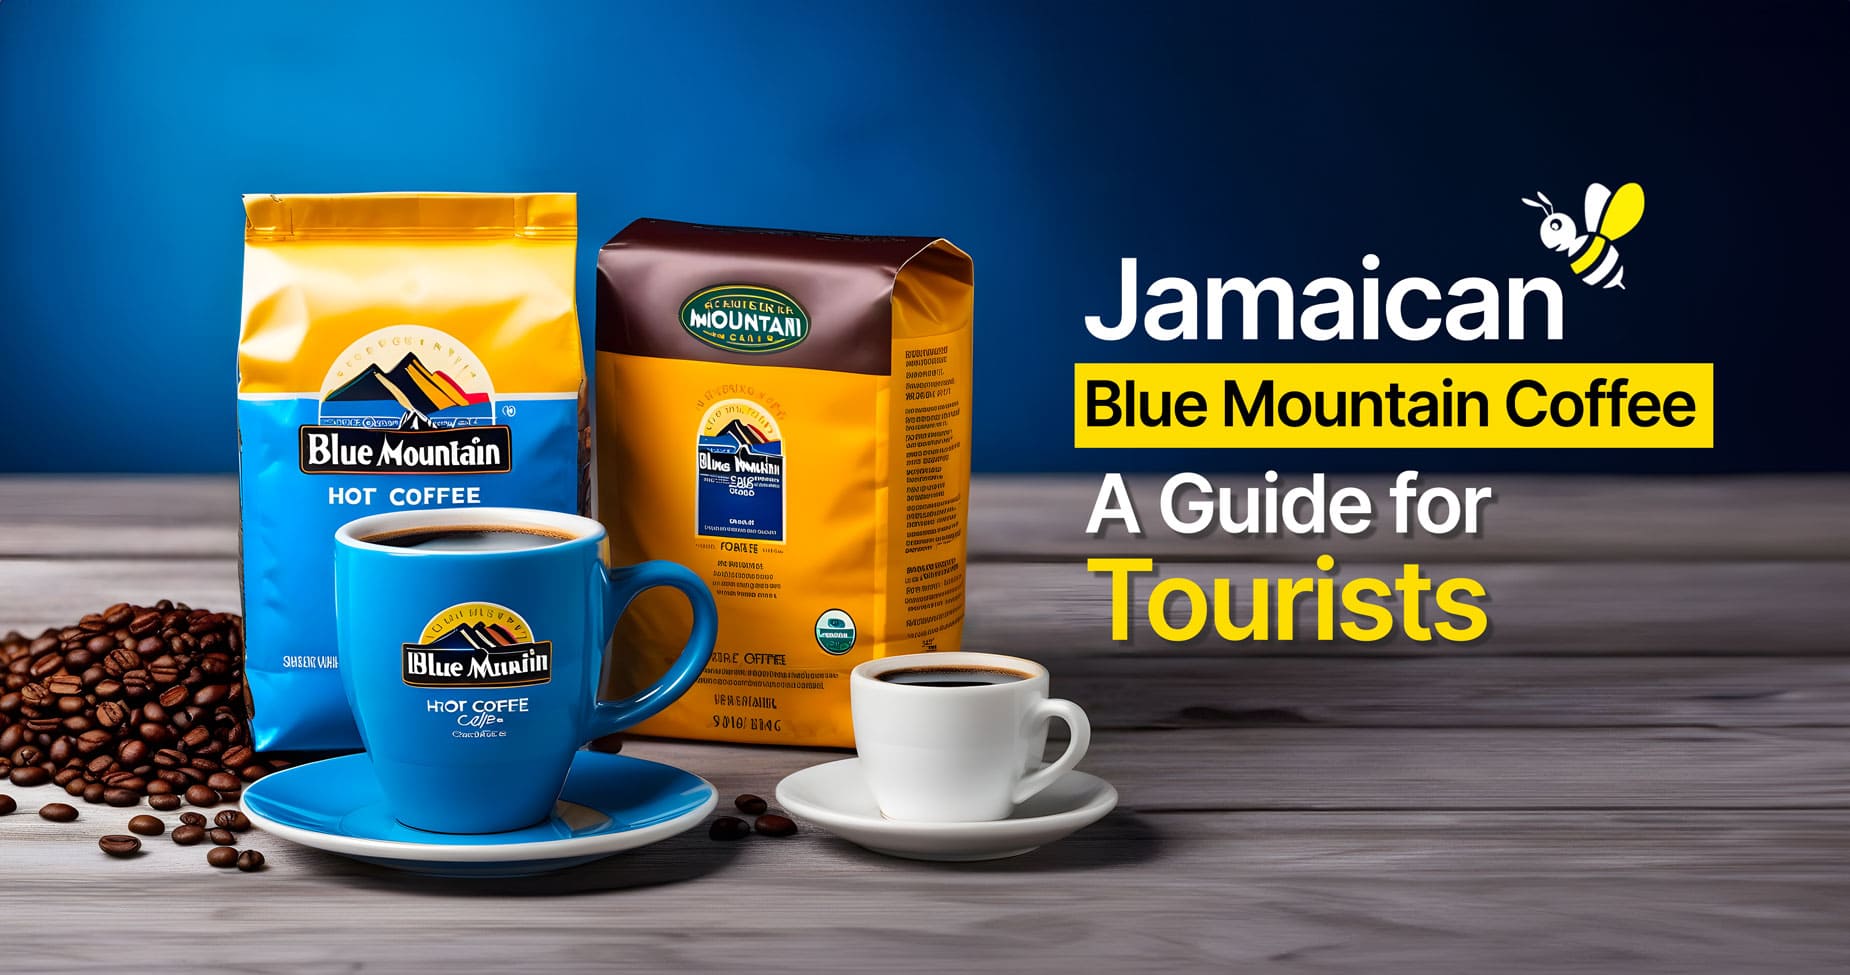 Jamaican Blue Mountain Coffee - 05 Reasons to Try It as a Tourist